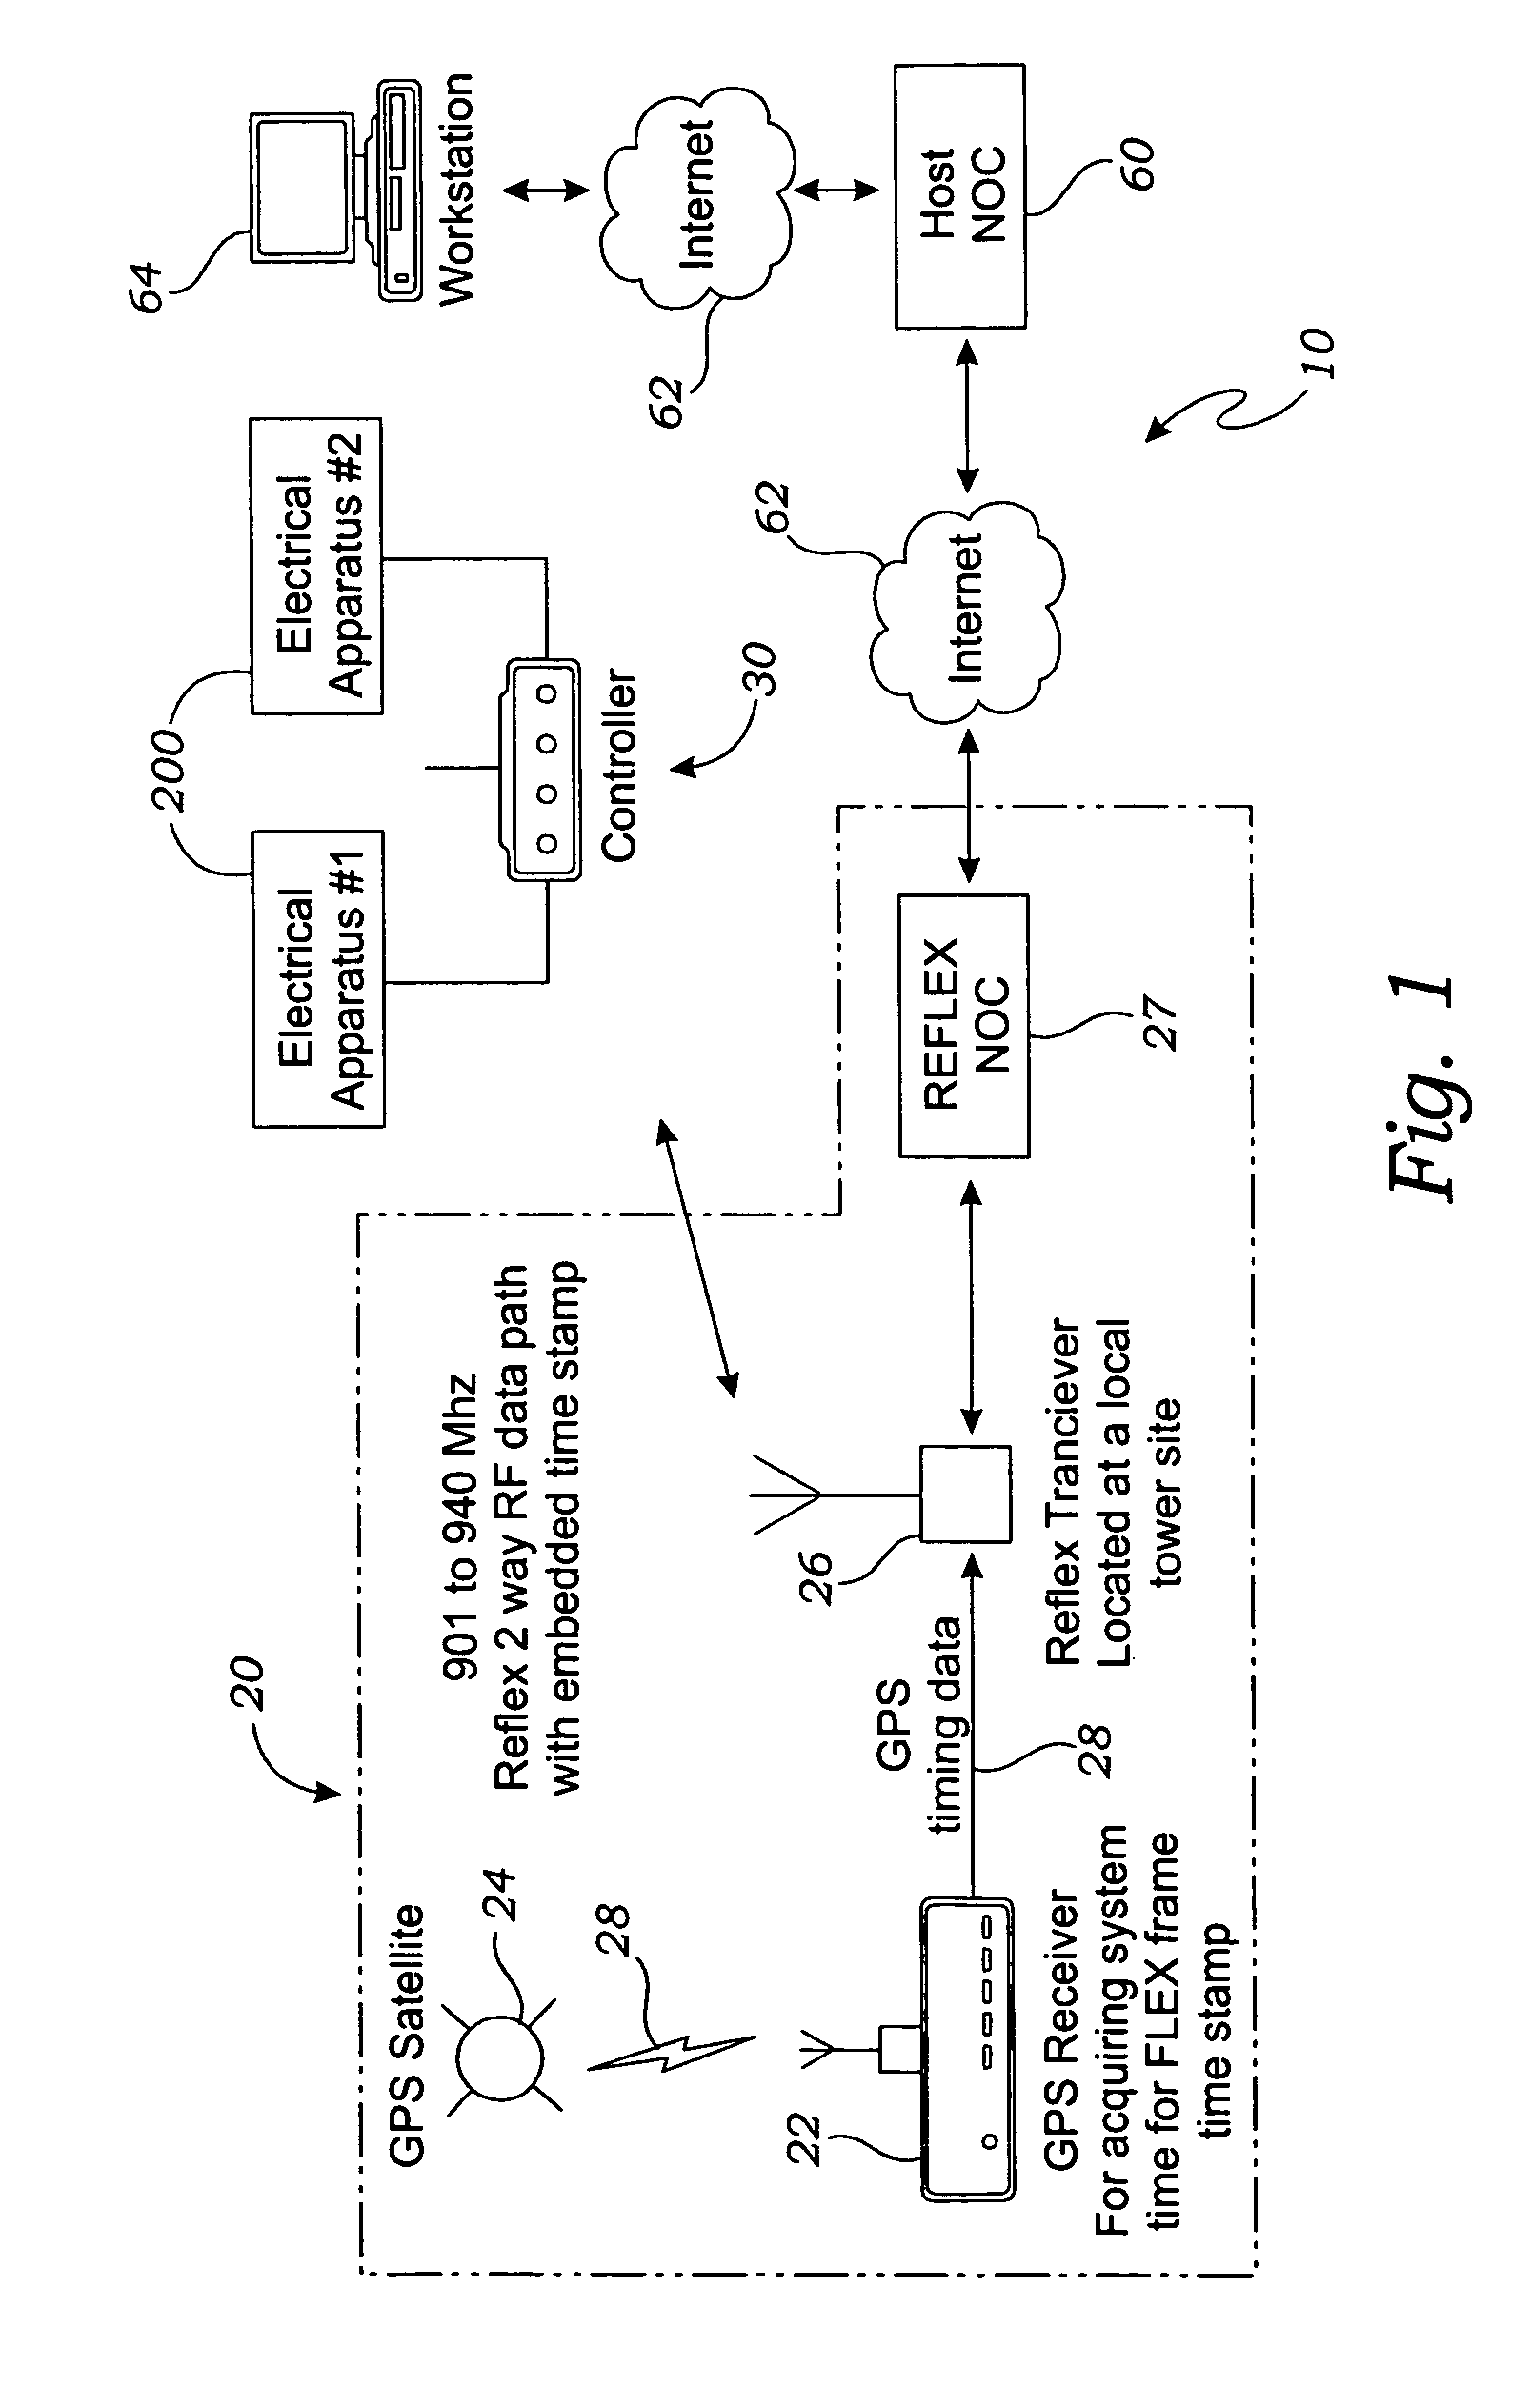 Wireless electrical apparatus controller device and method of use